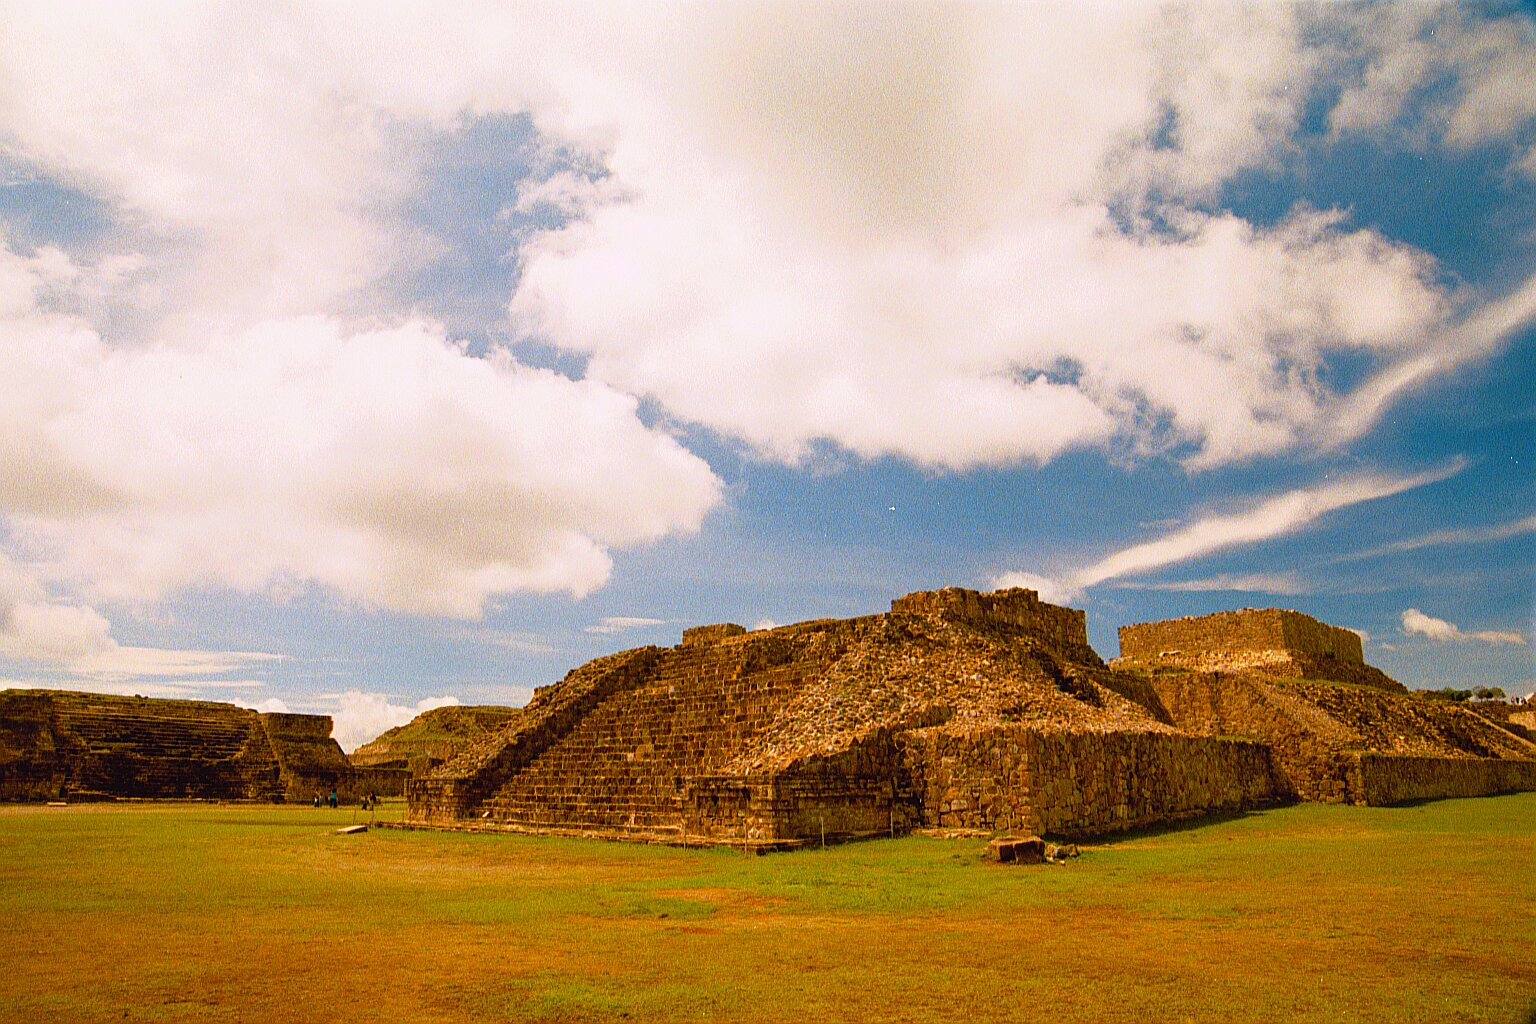 Monte Alban Today